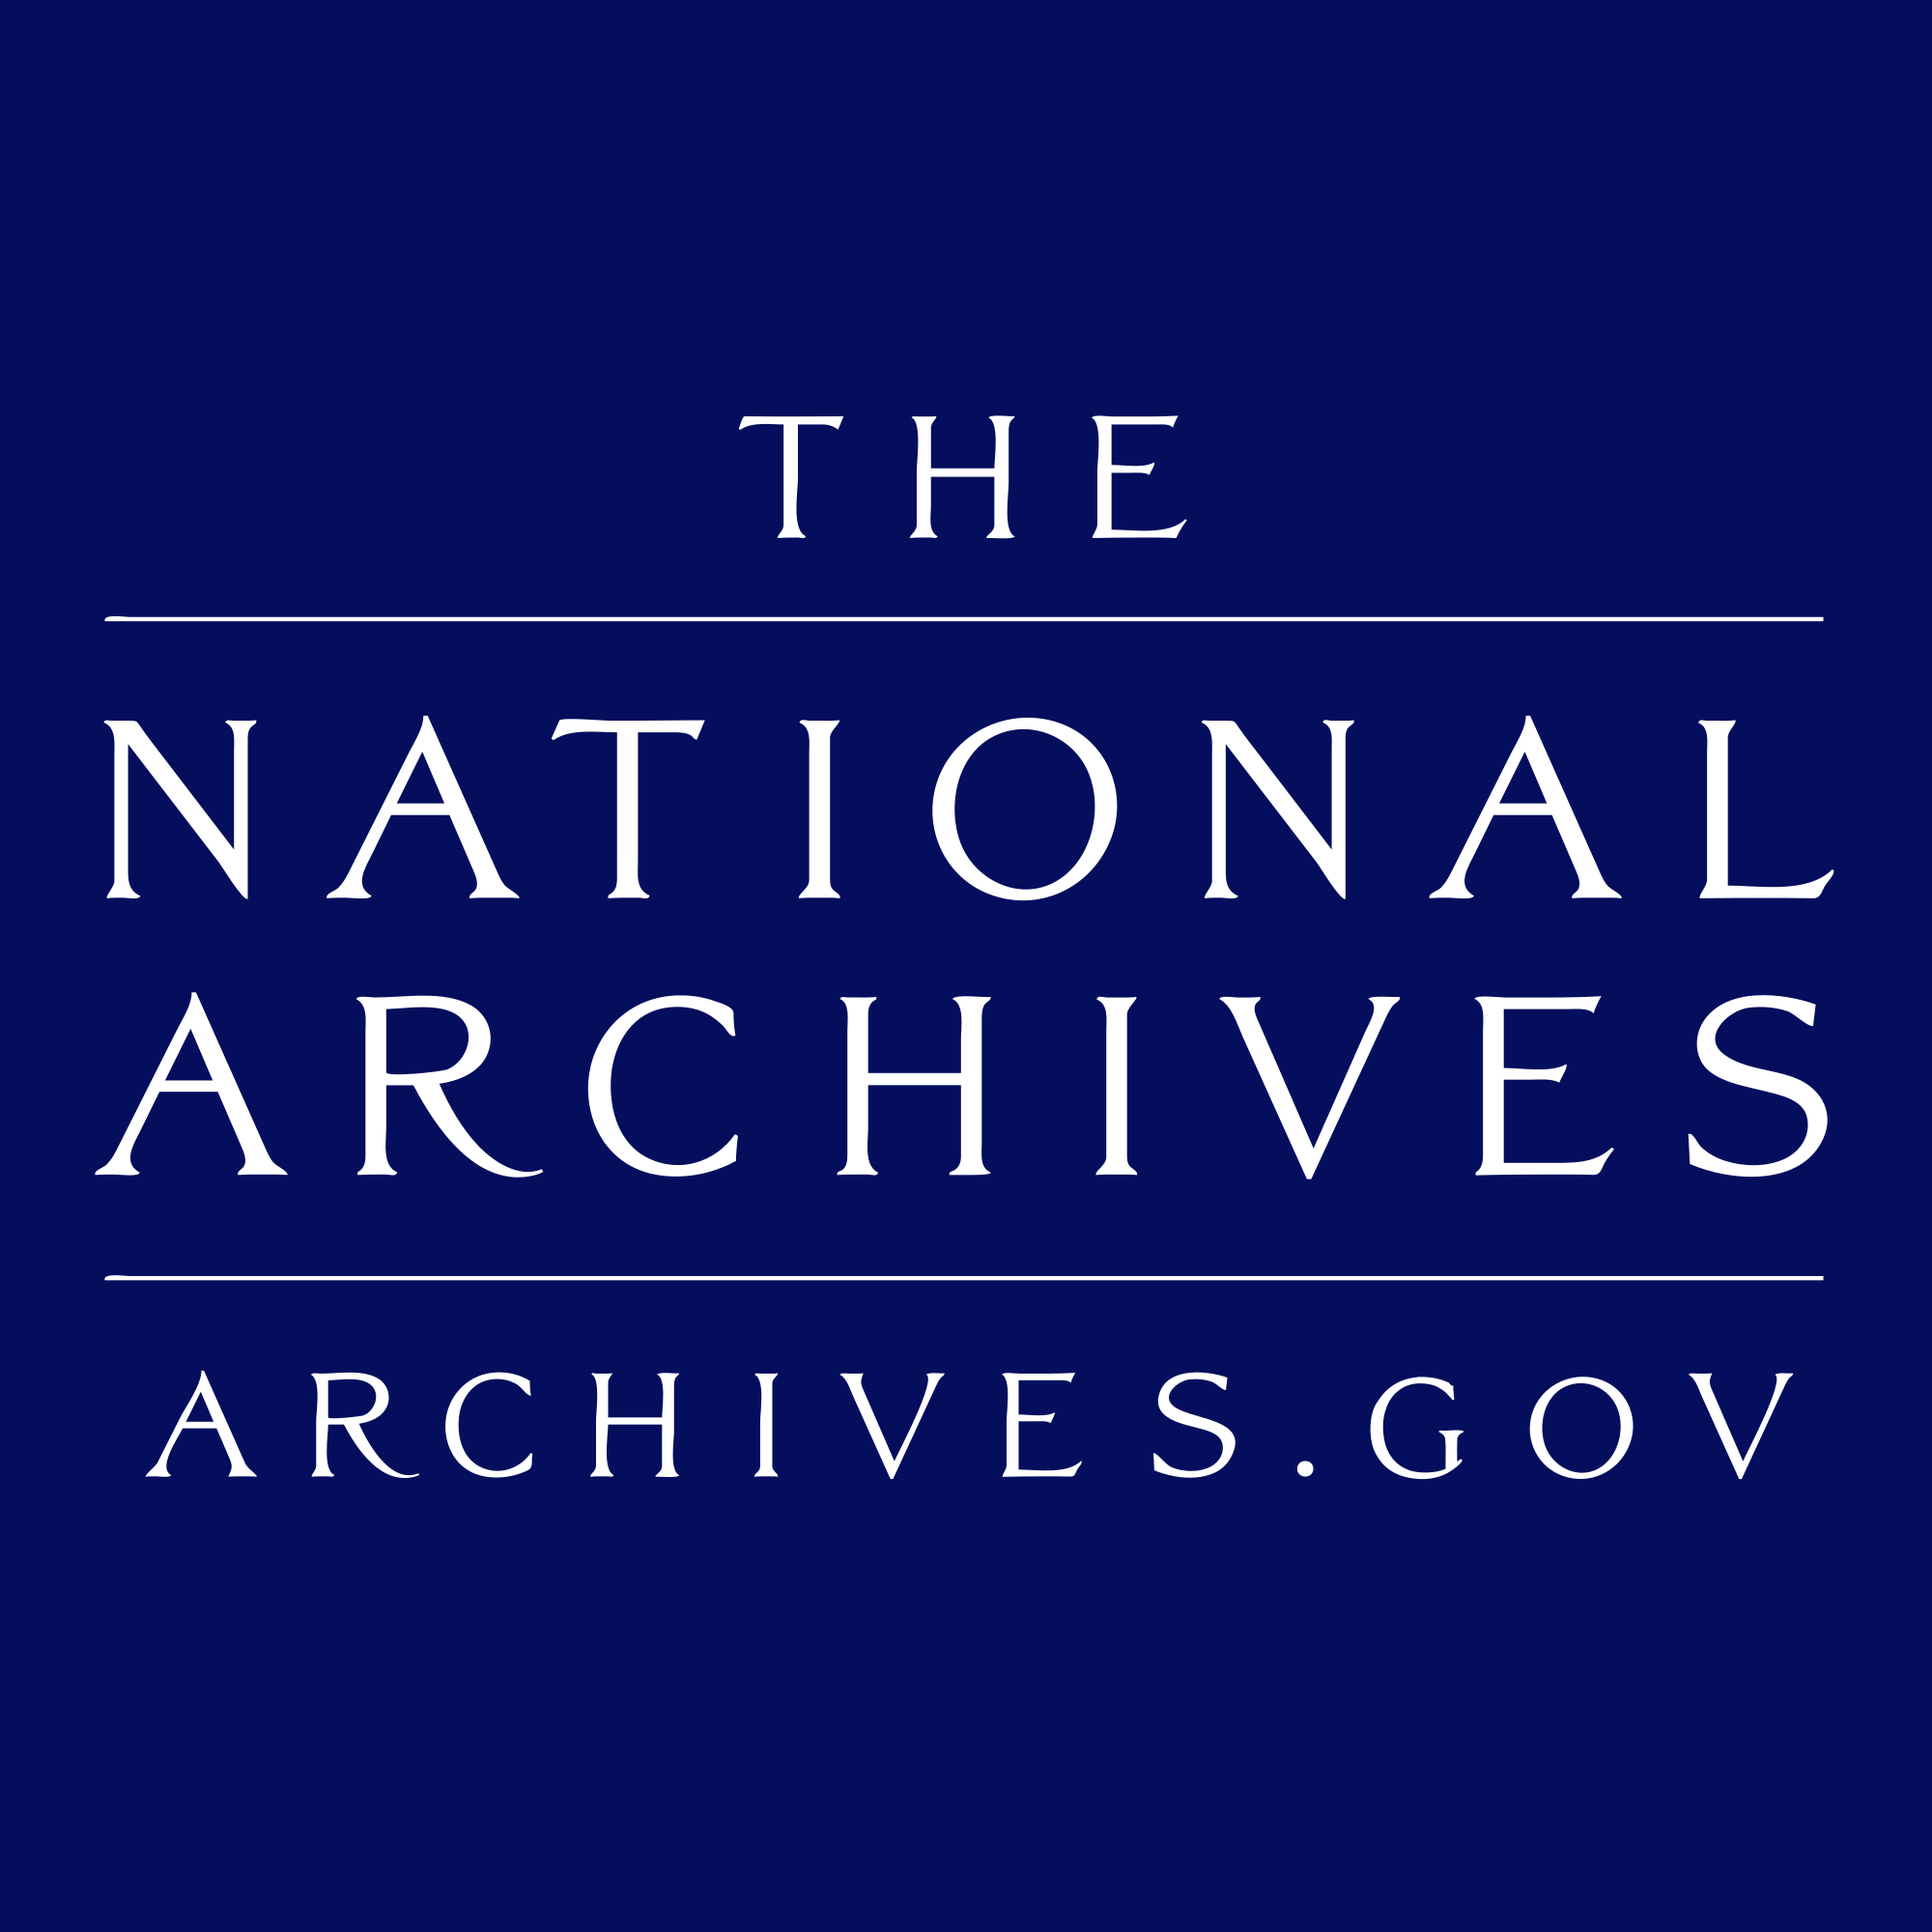 National Archives Logo - File:US-NationalArchives-Logo.png - Wikimedia Commons